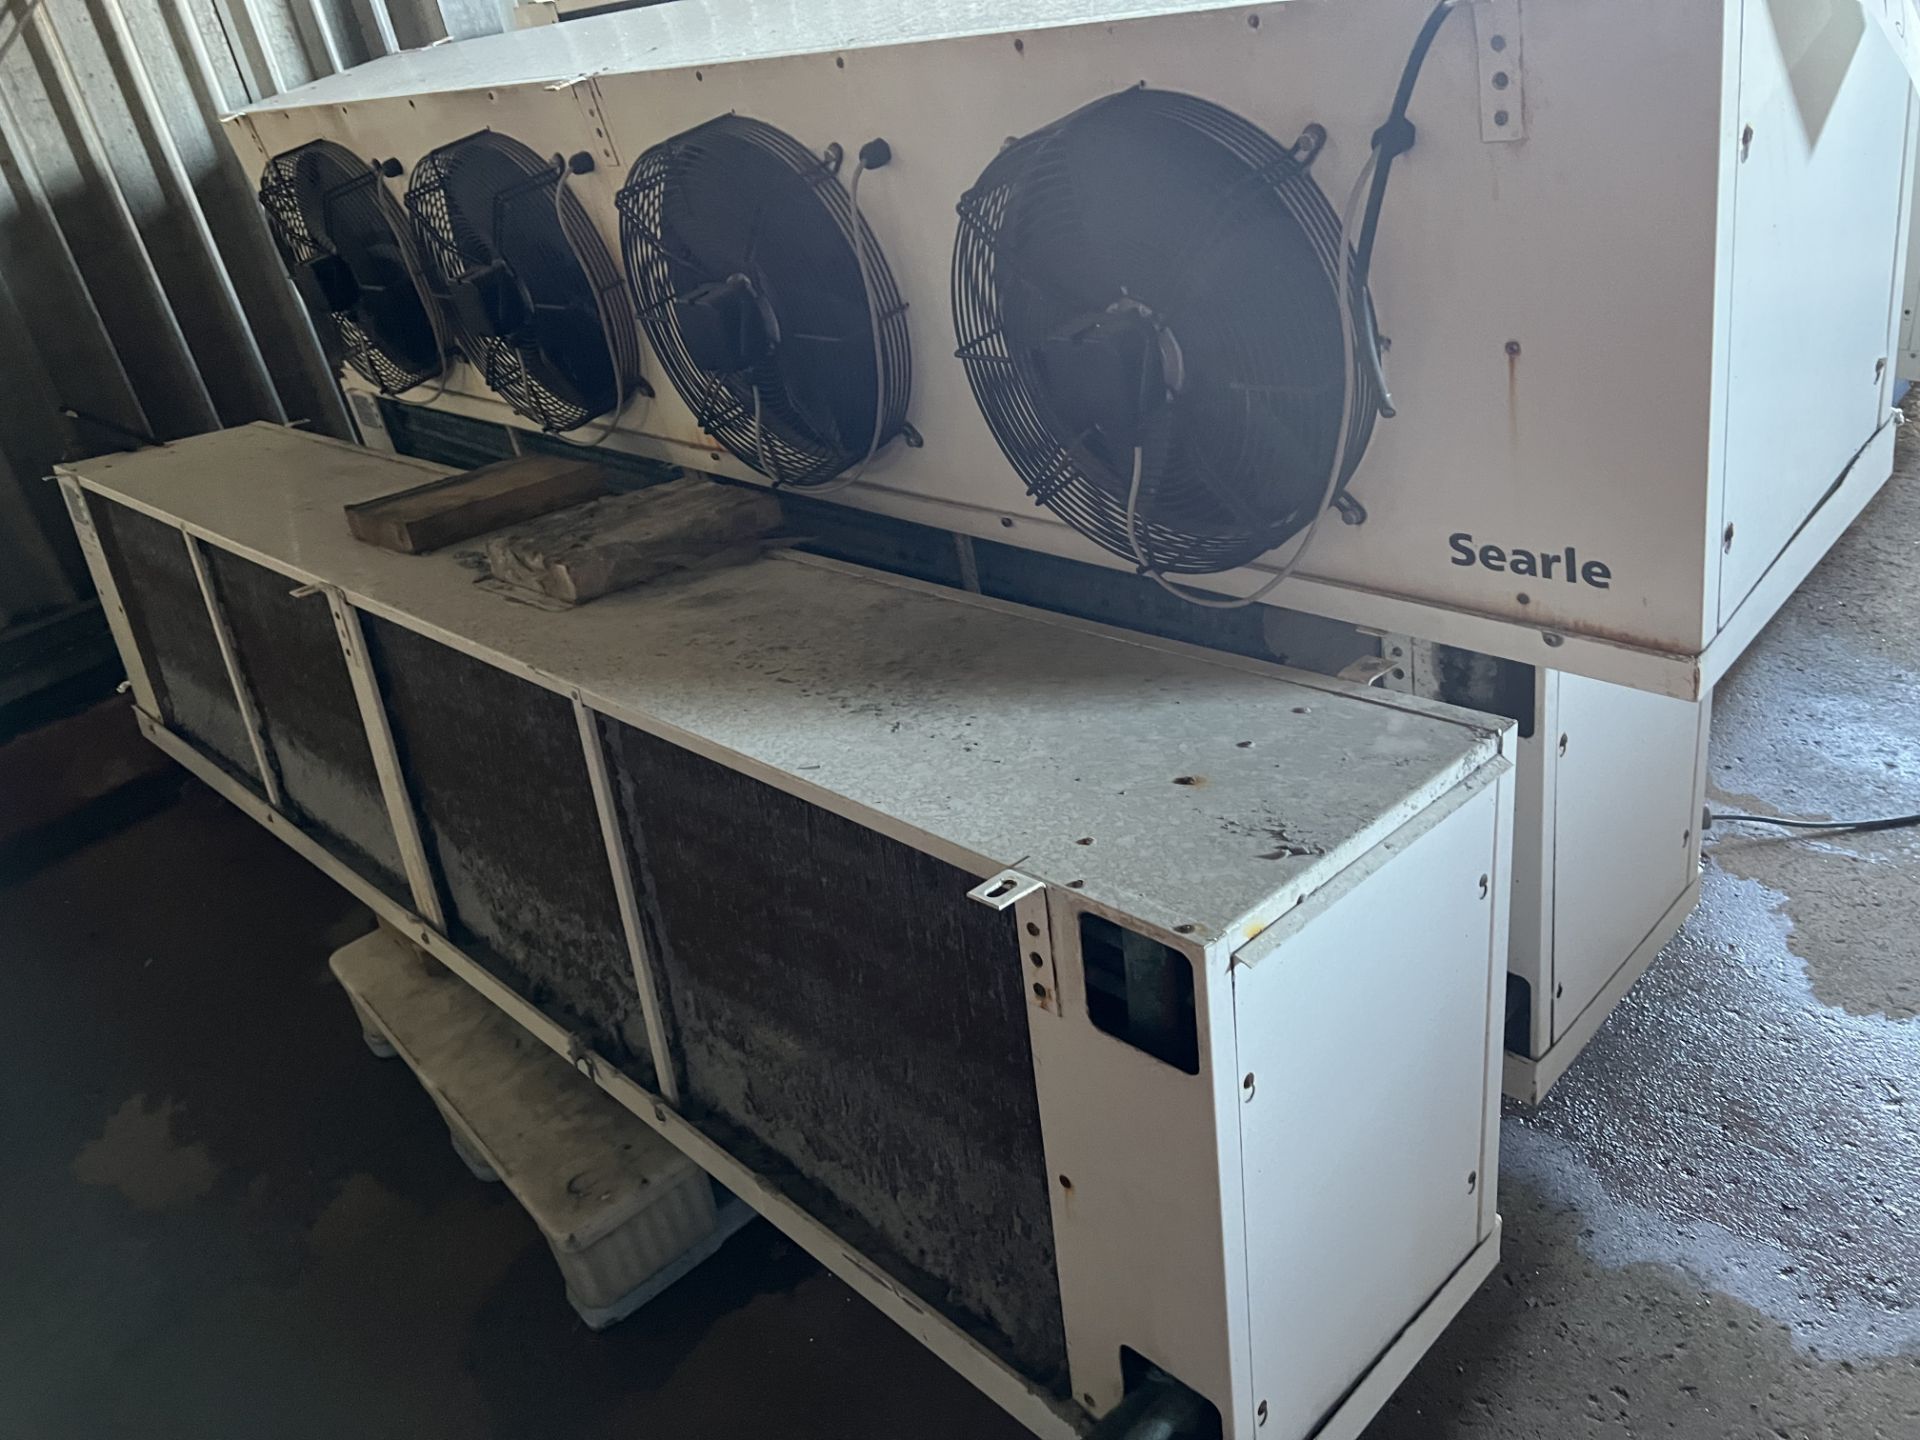 Three Searle/ GEA KME175/4AL Four Fan Ceiling Mounted Cooling Fans, approx. 2.75 x 0.4 x 0.55m - Image 3 of 3